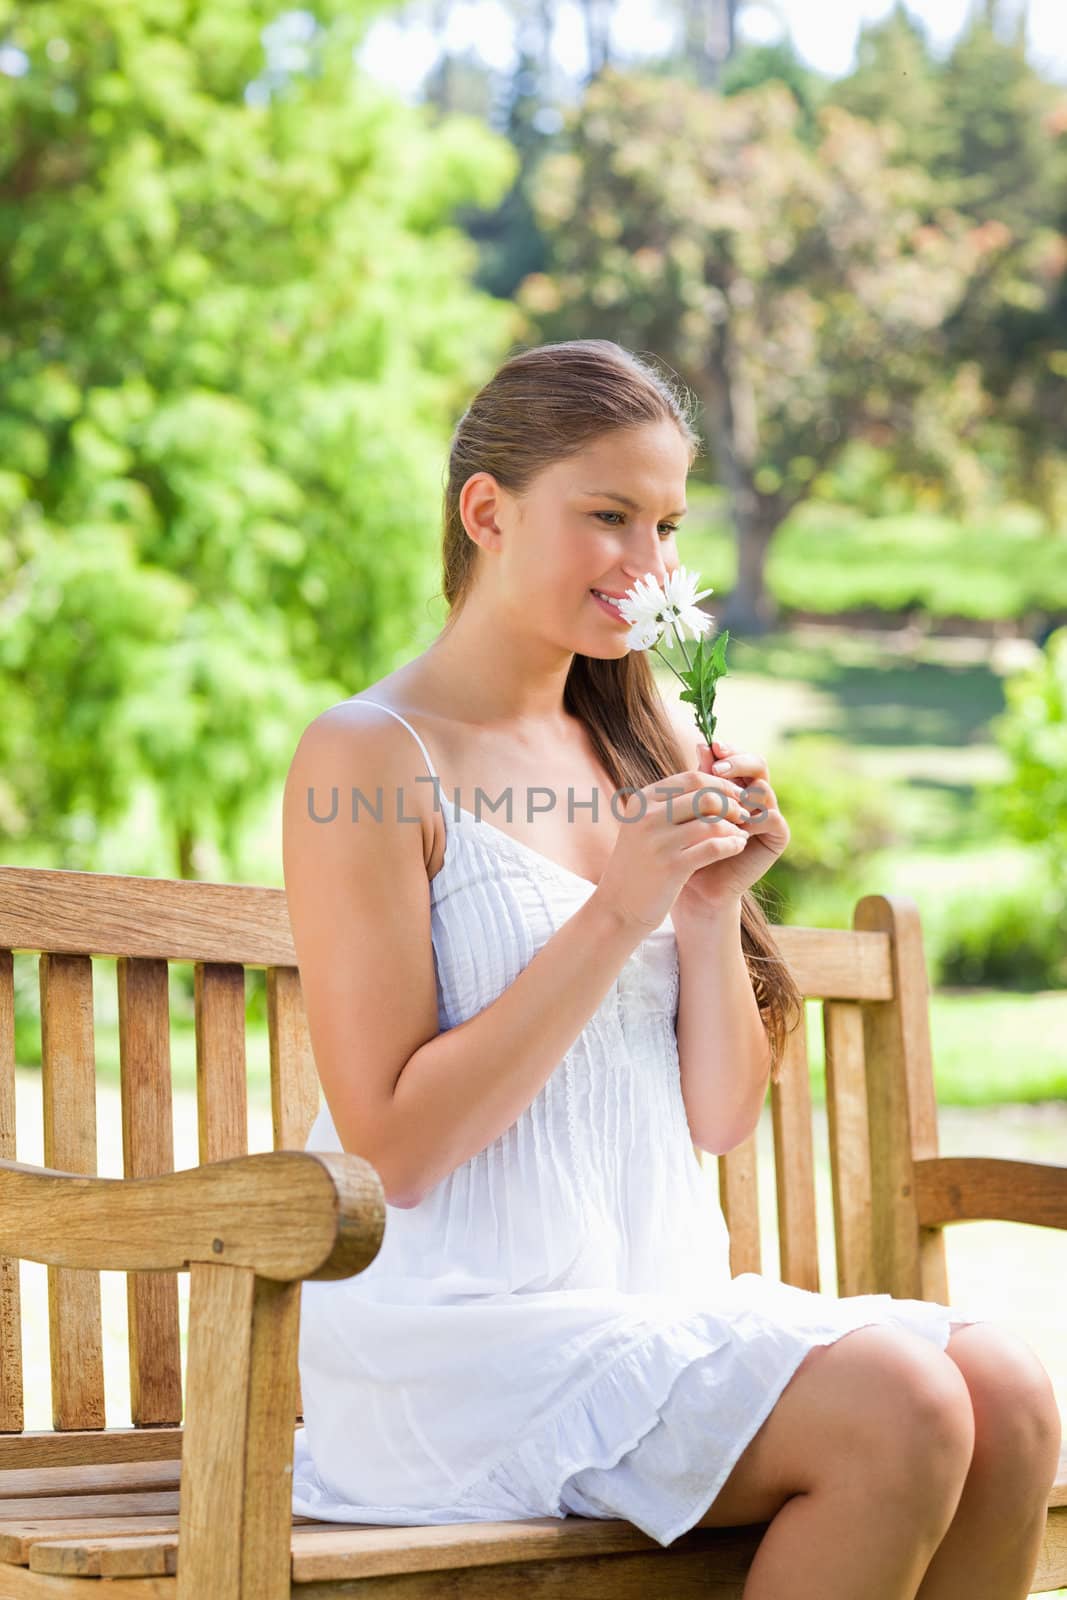 Smiling young woman smelling on a flower while sitting on a park bench